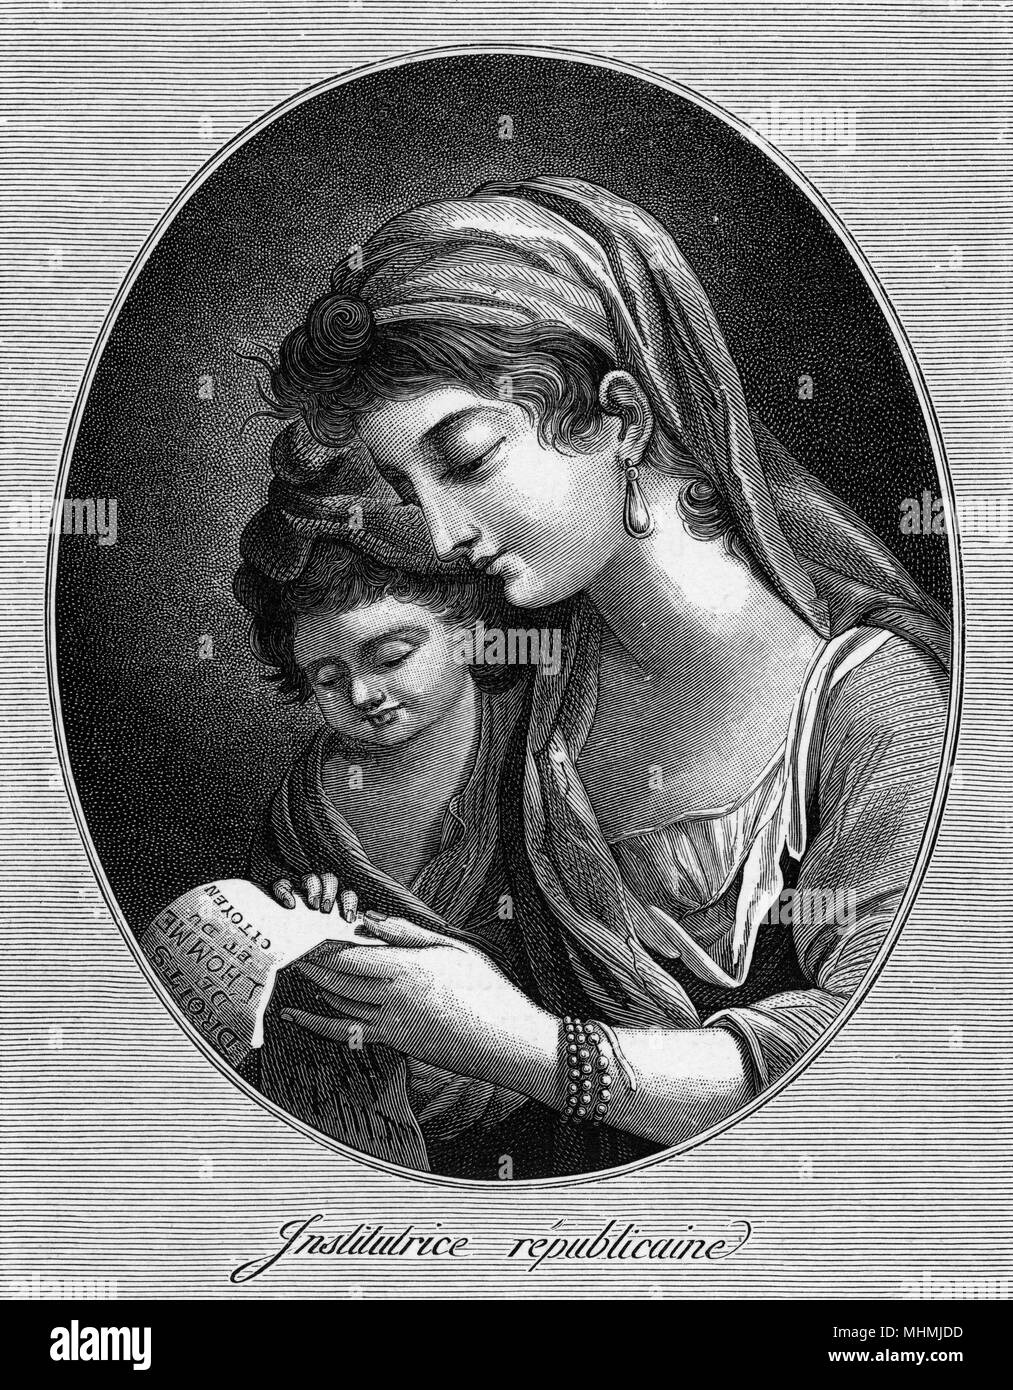 A mother reads the 'Declaration des droits de L'homme et du citoyen', which  extol the rights of man, to her young child. Date: 18th century Stock Photo  - Alamy